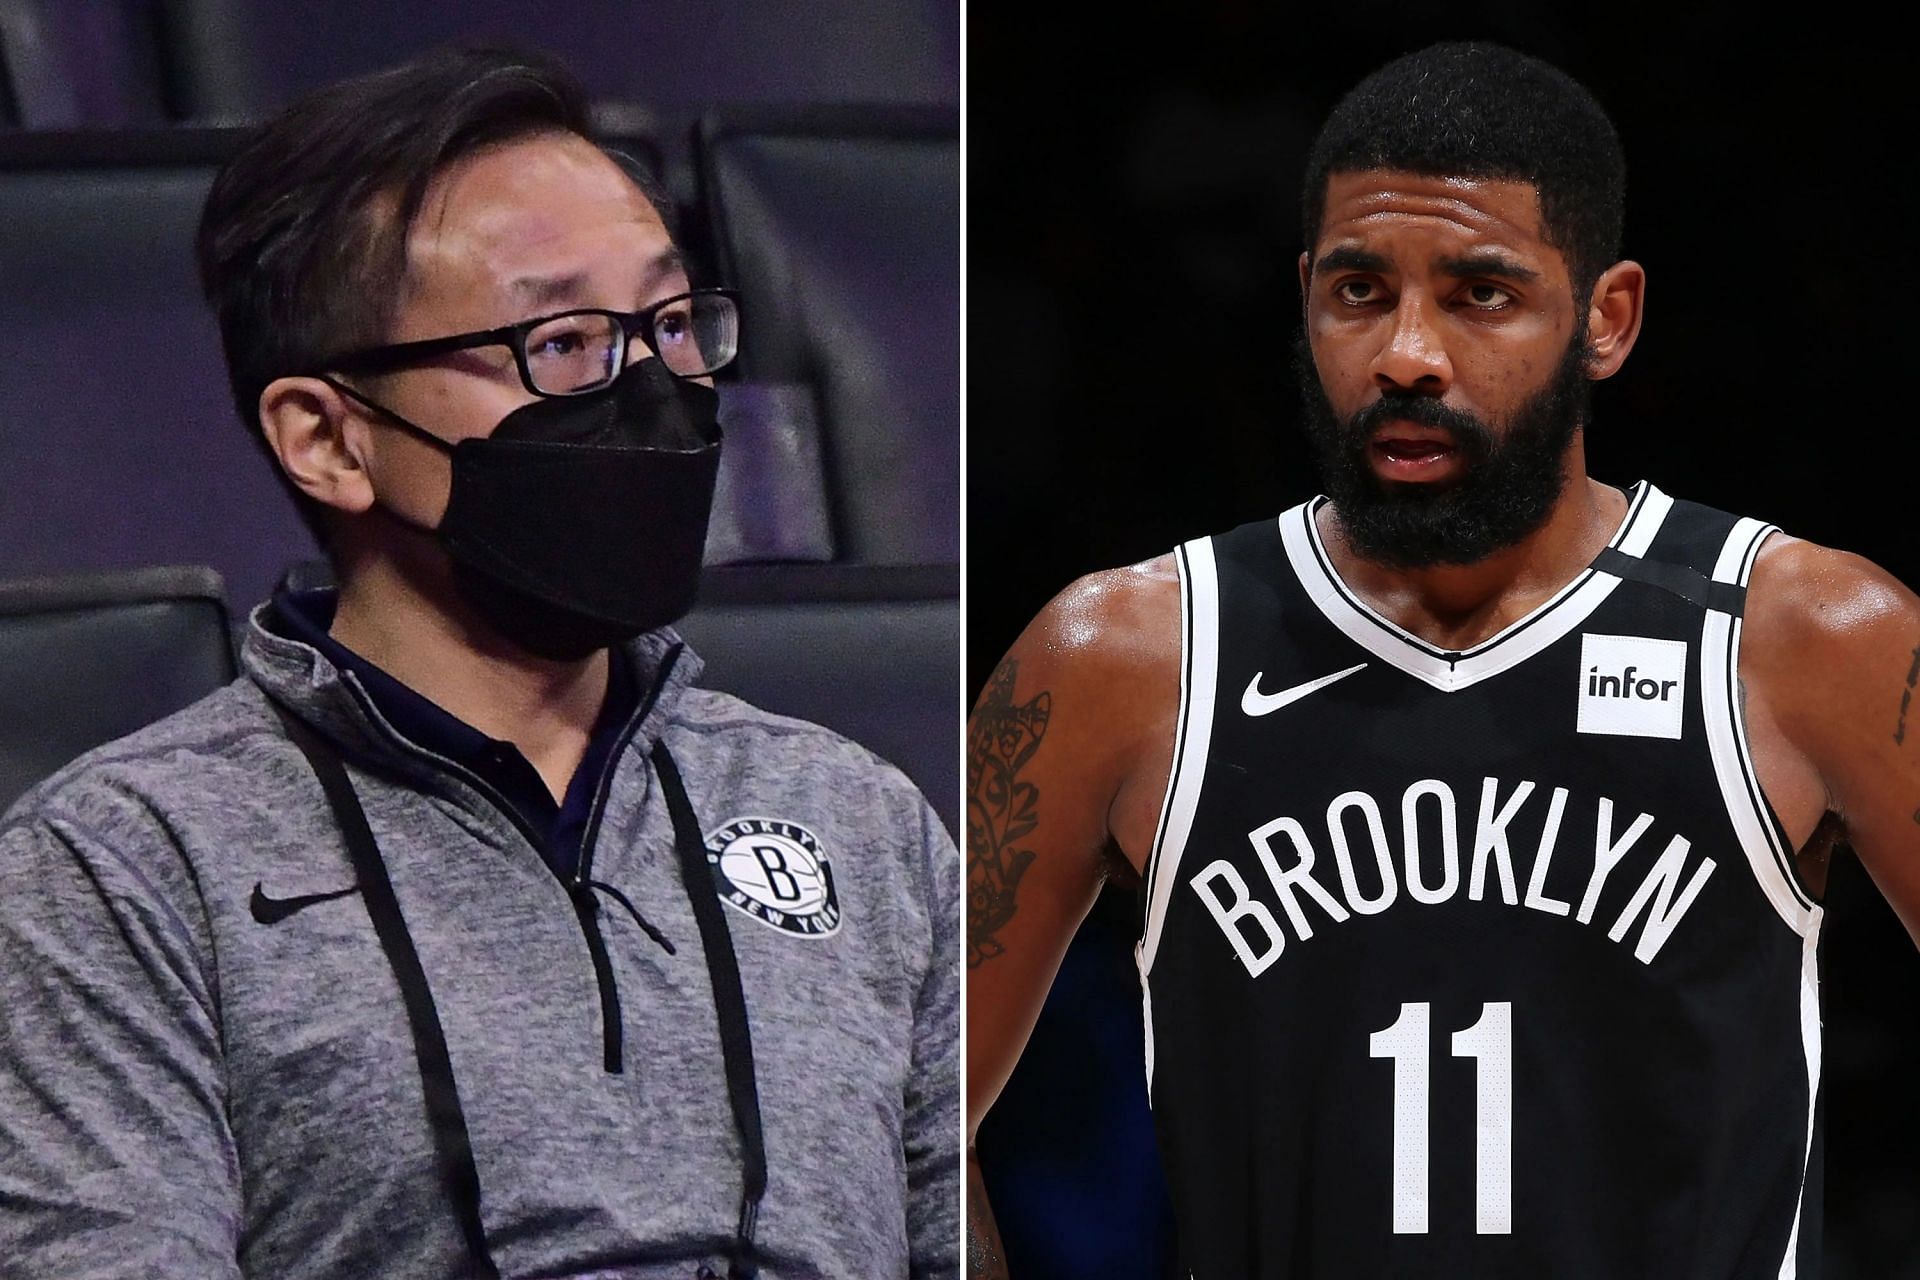 The Brooklyn Nets owner, Joe Tsai, is convinced that the decision to sideline Kyrie Irving was for the best interest of the team. [Photo: New York Post]